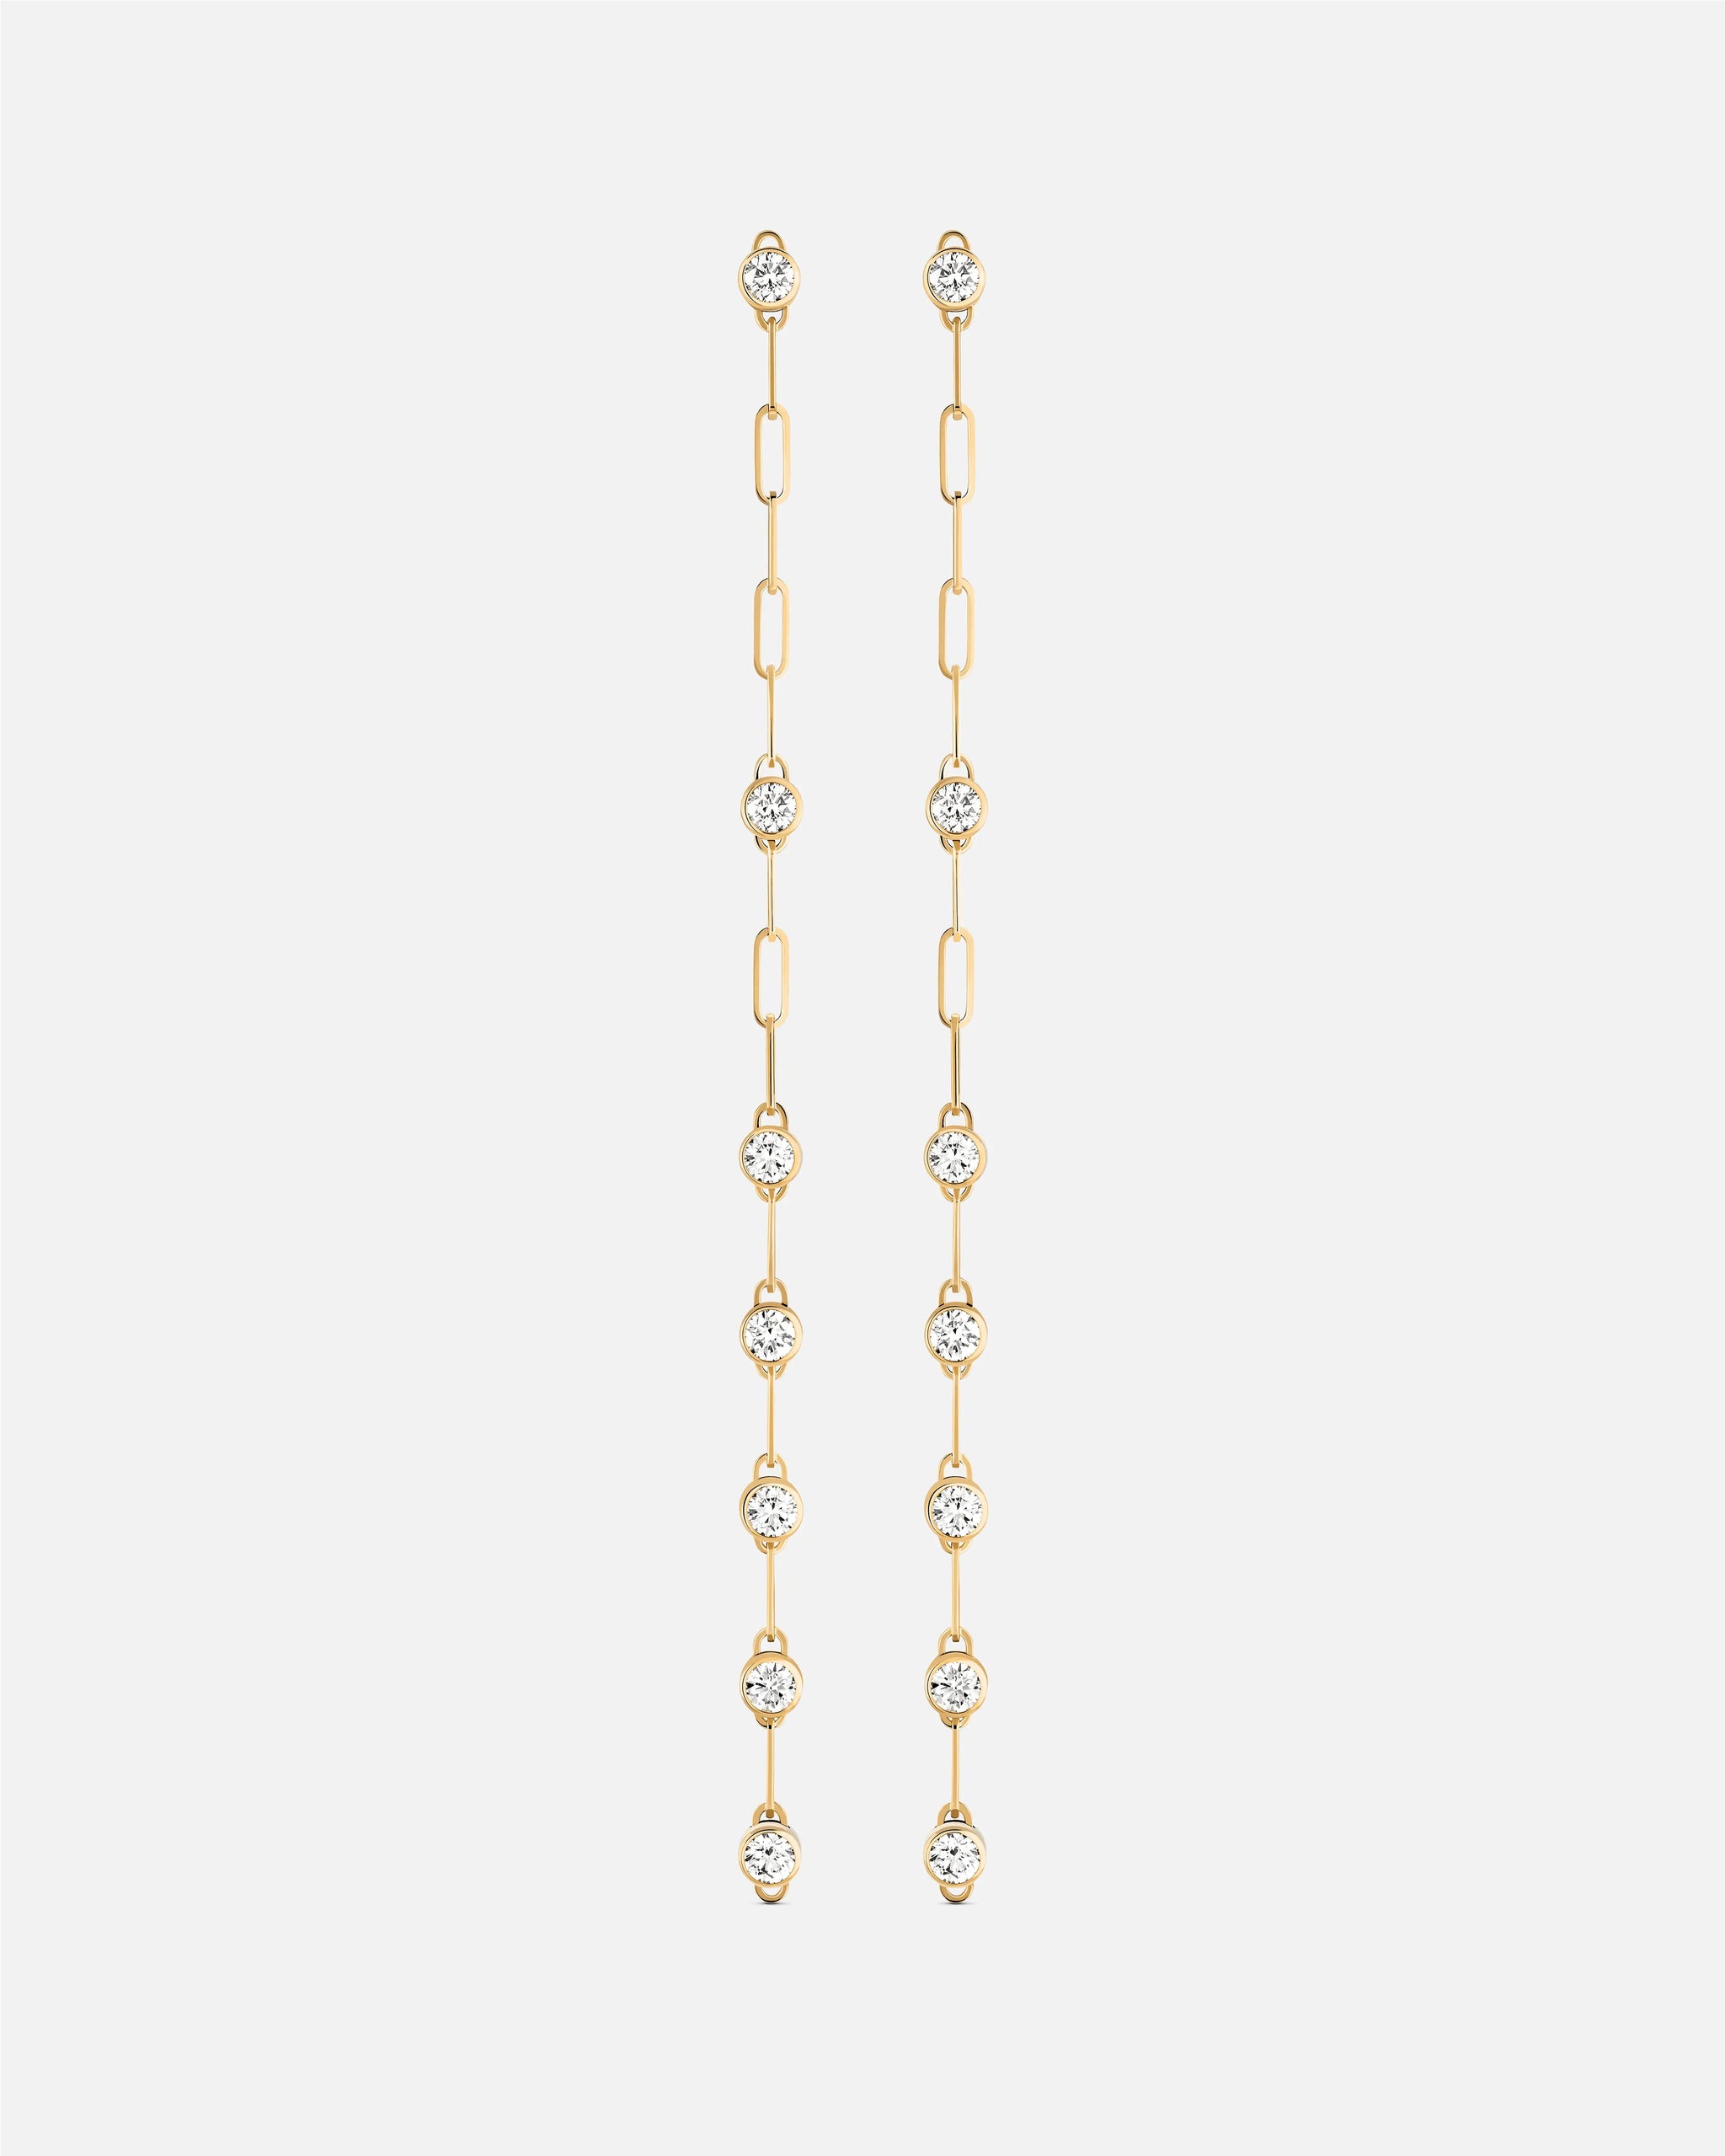 Evening GM Classics Earrings in Yellow Gold - 1 - Nouvel Heritage